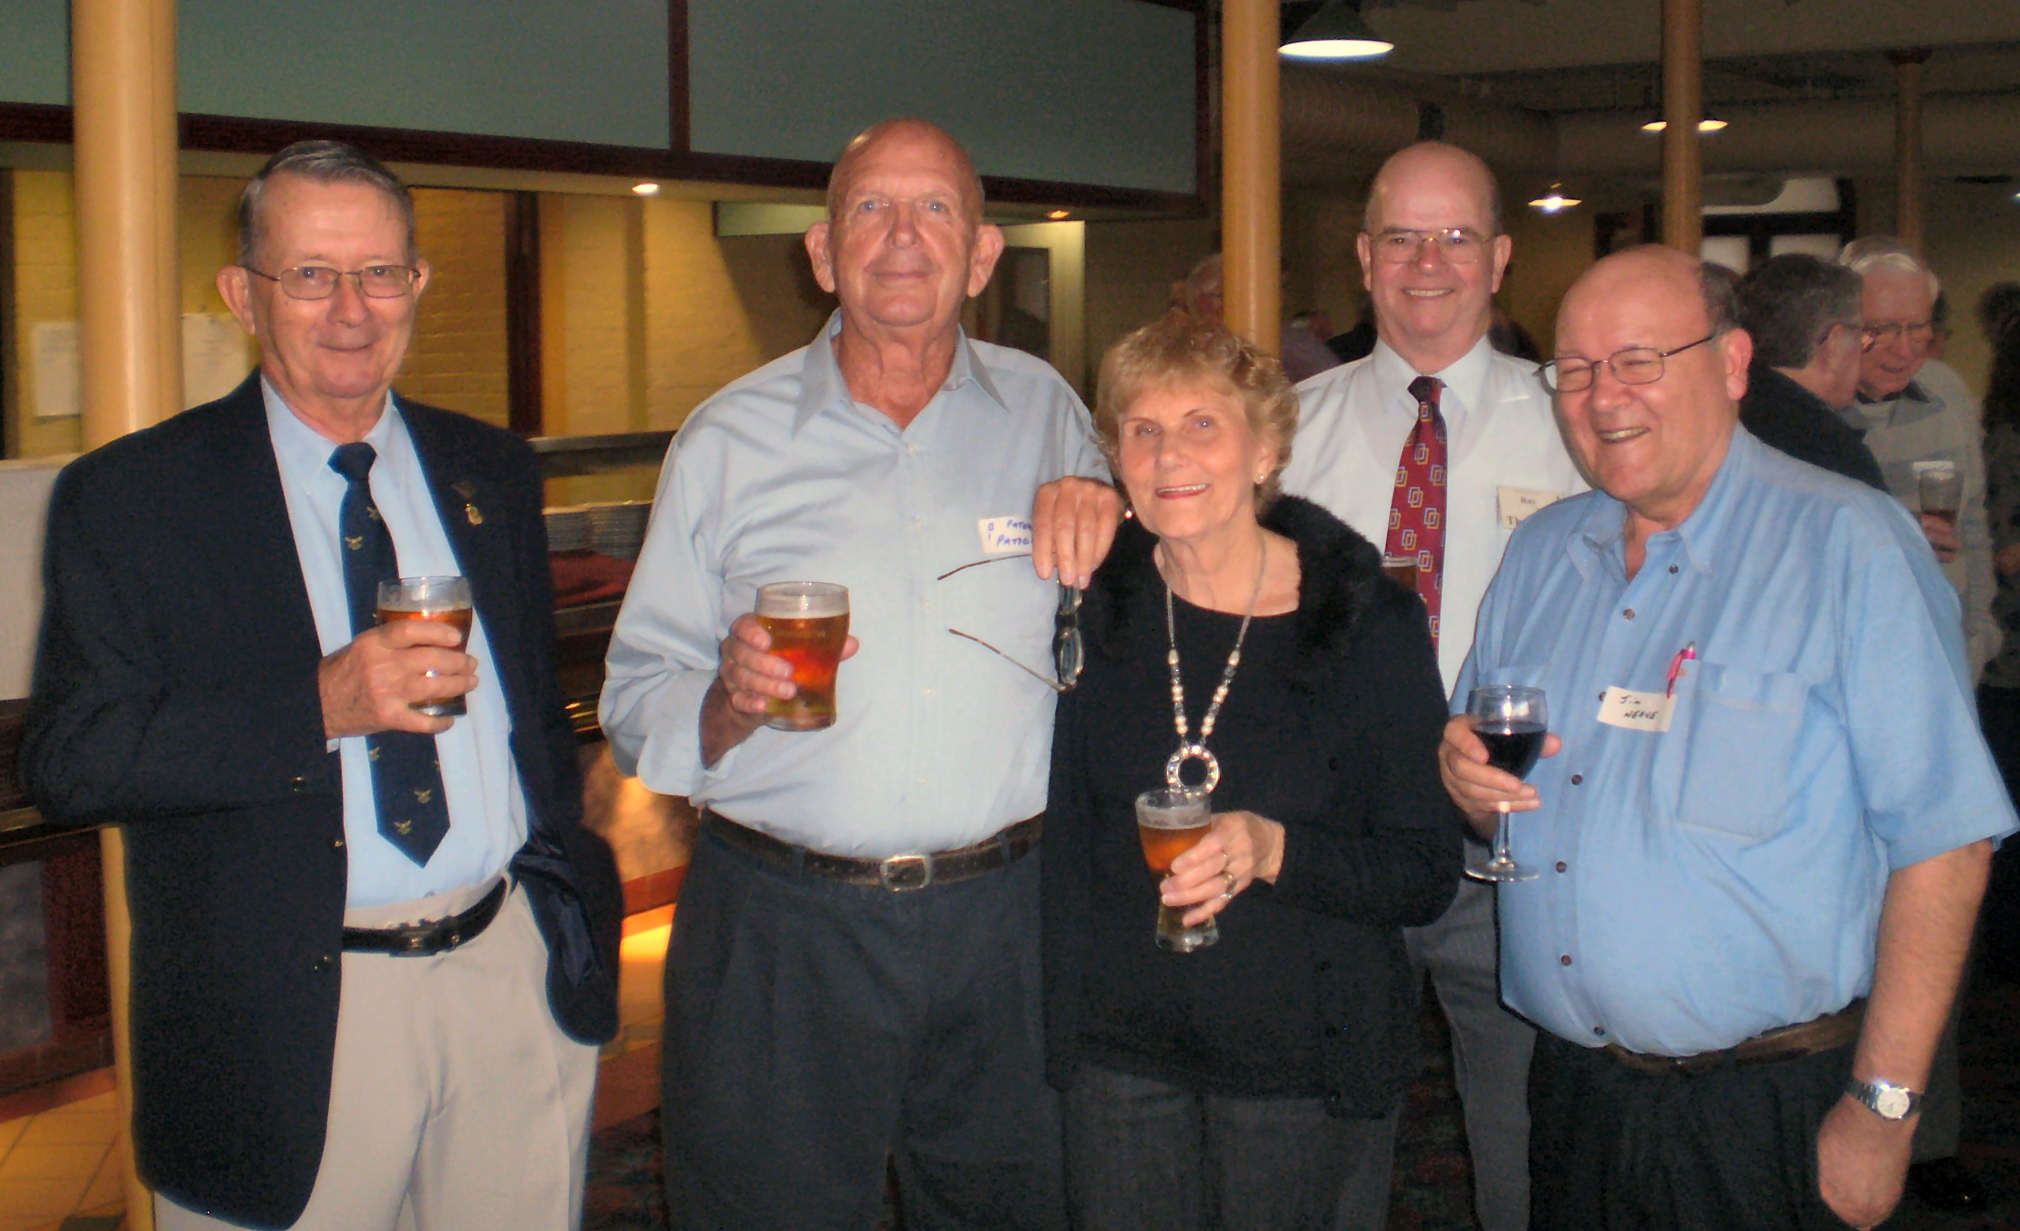 Norm Simpson, Brian Patterson, Esme Patterson, Ray Thompson and Jim Neave